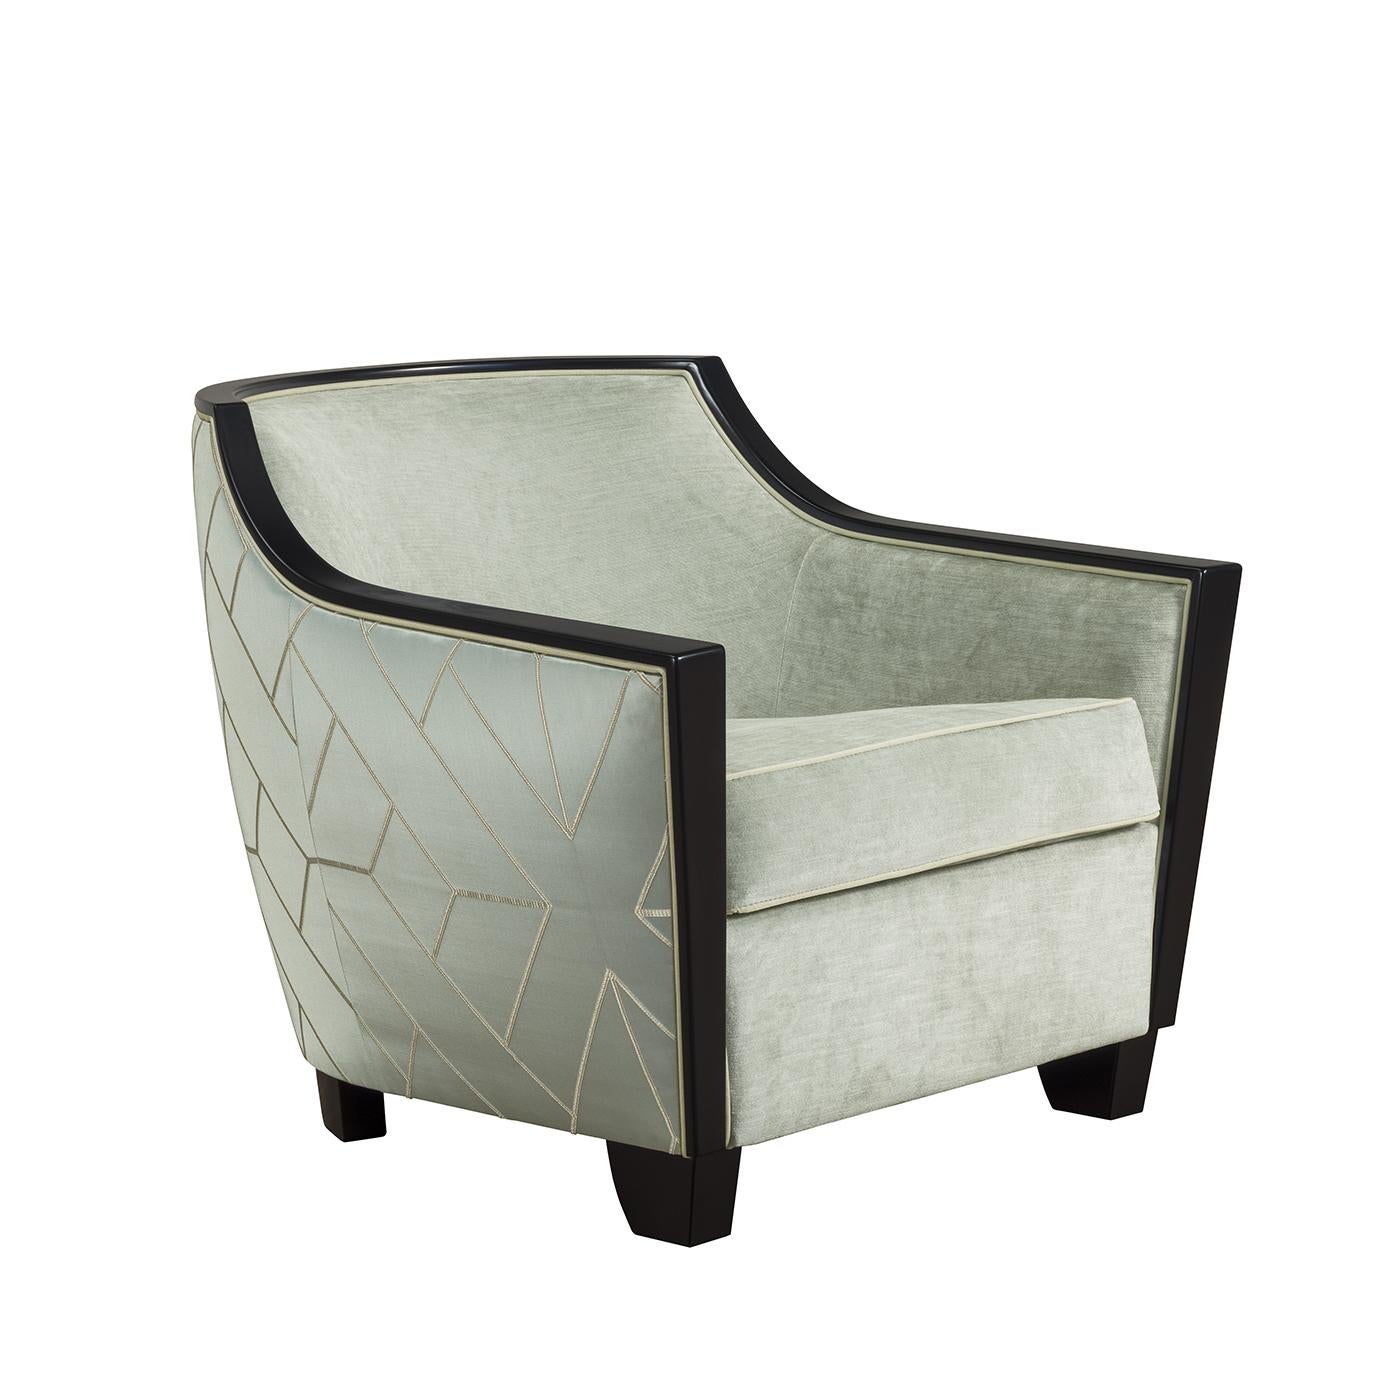 Elegance and comfort mix in a harmonious design that adds a refined touch to both a modern and a classic interior. Either by the fire in a living room, as a reading chair in the study or as an extra seat in the bedroom, this armchair will be